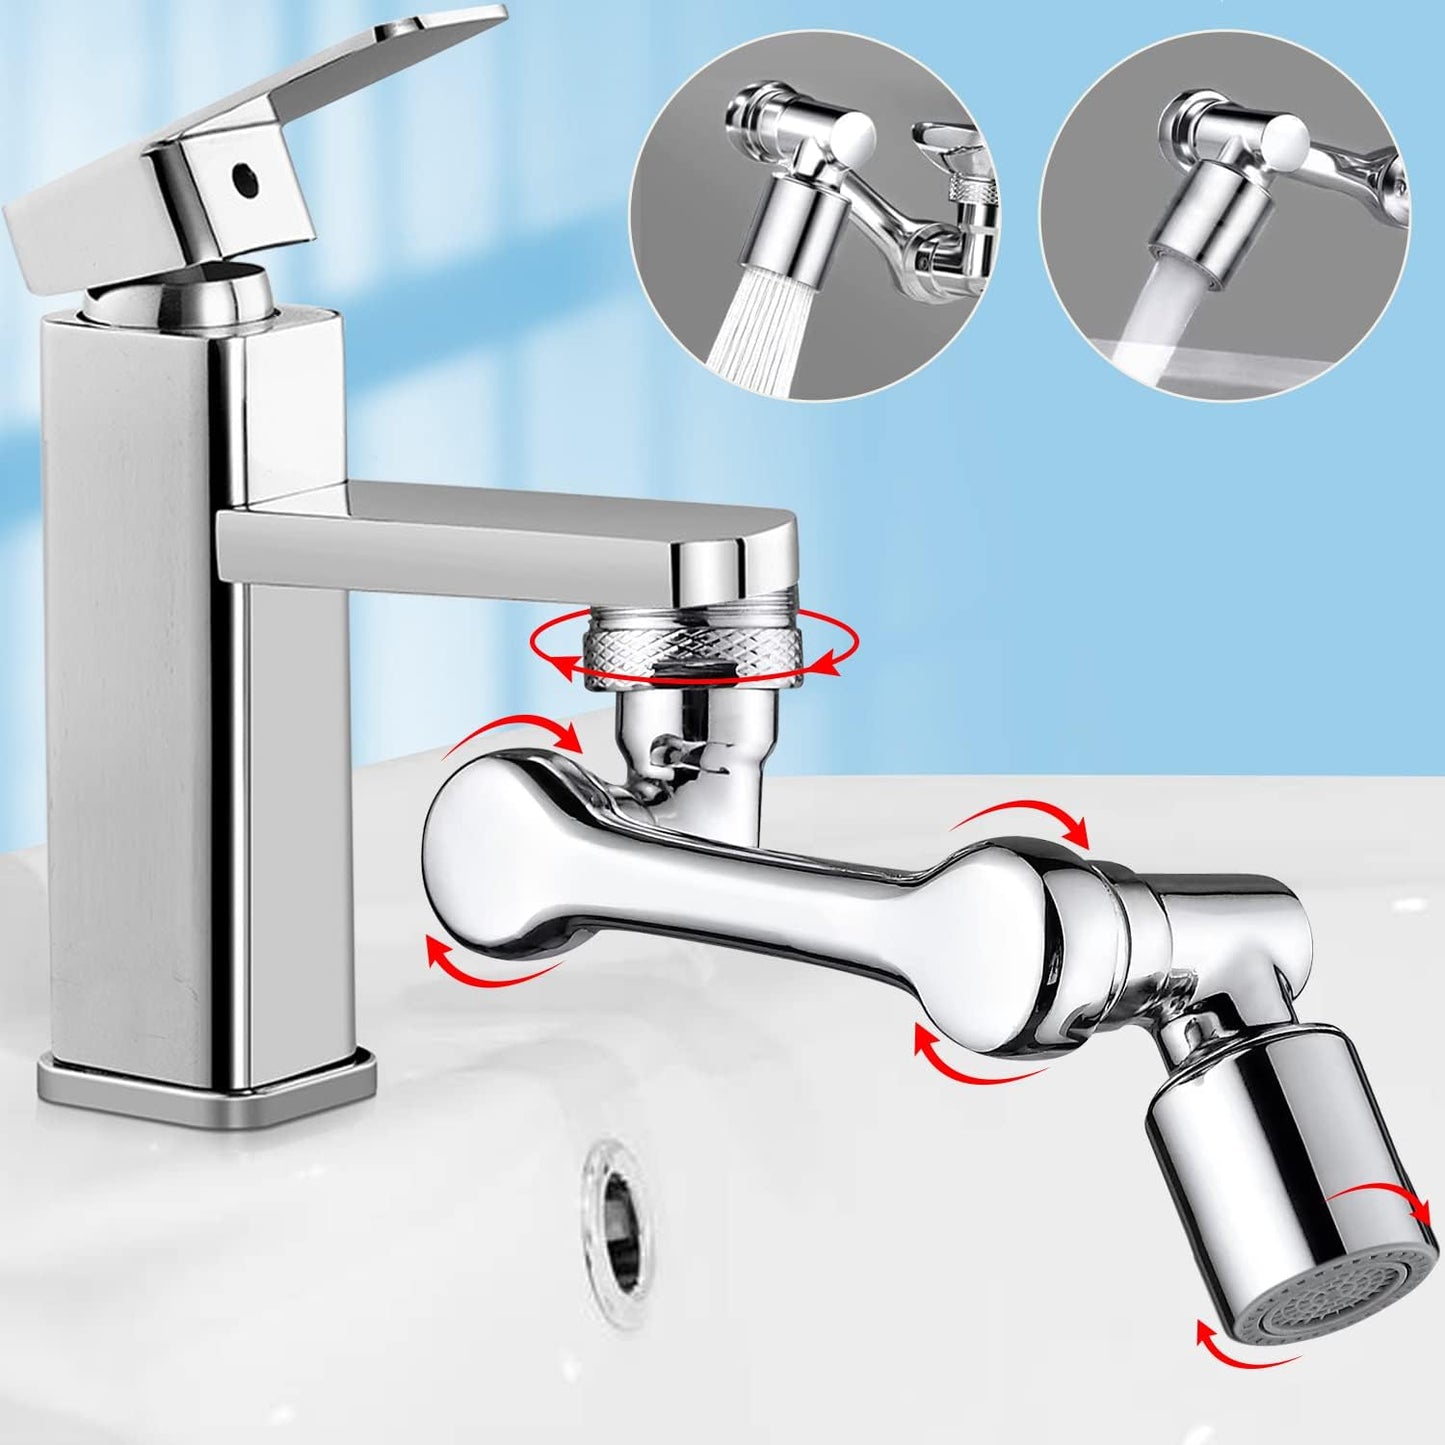 Rotating extension for faucet